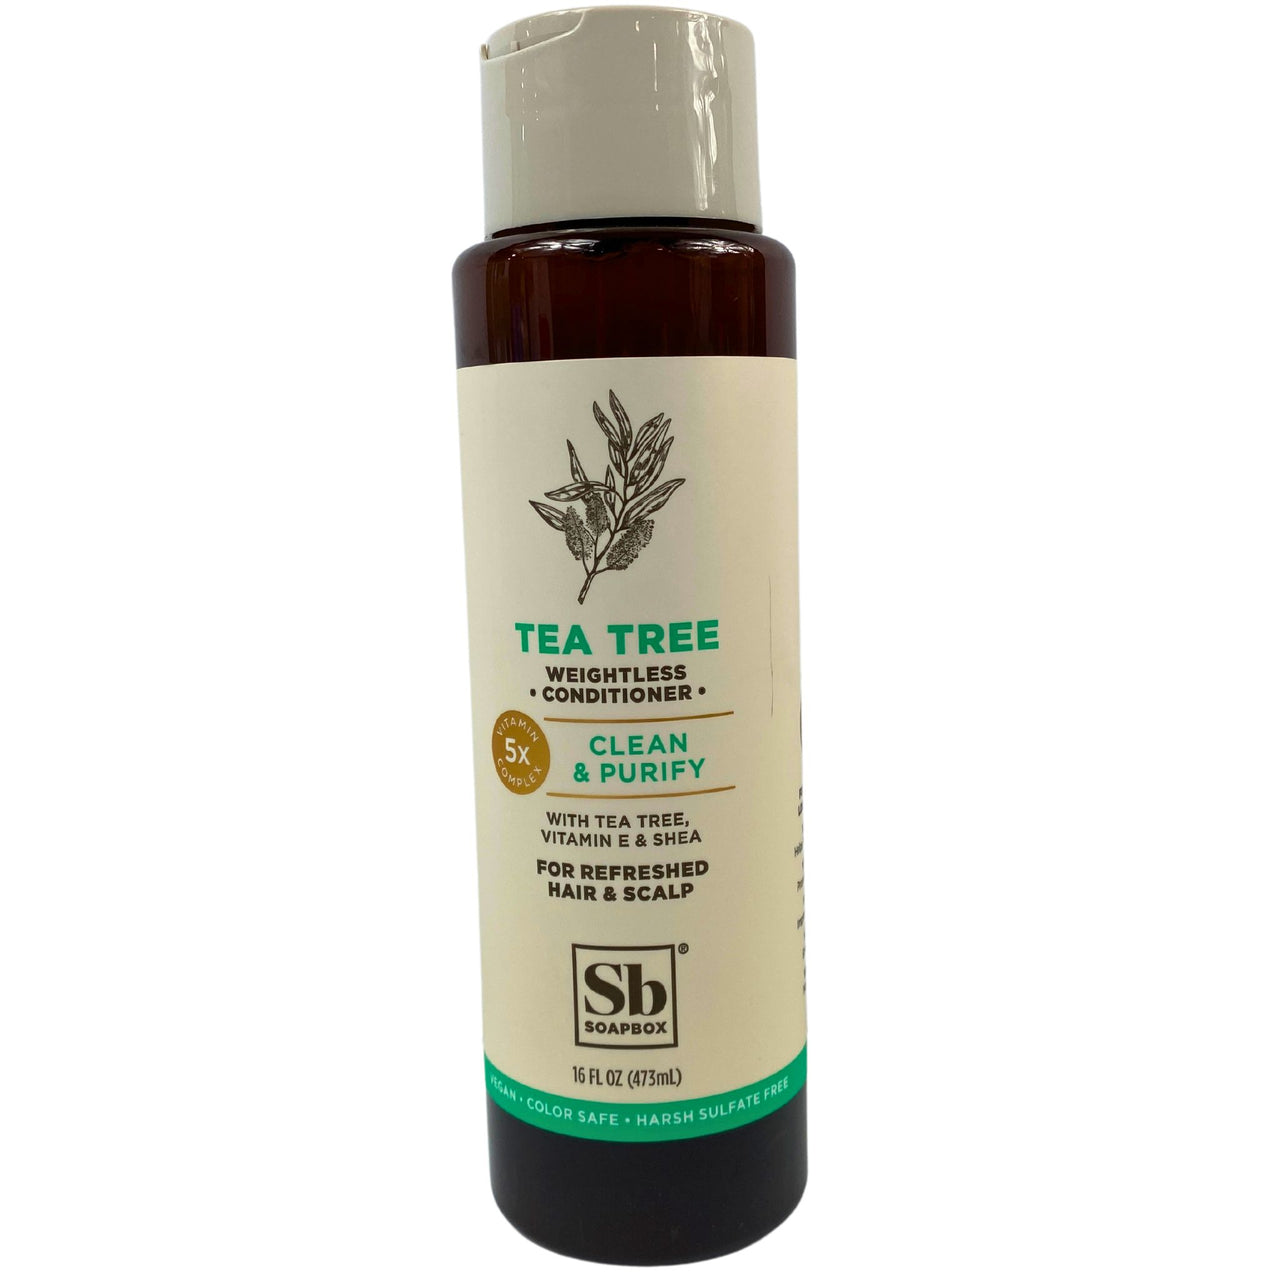 Sb Tea Tree Weightless Conditioner Clean & Purify 